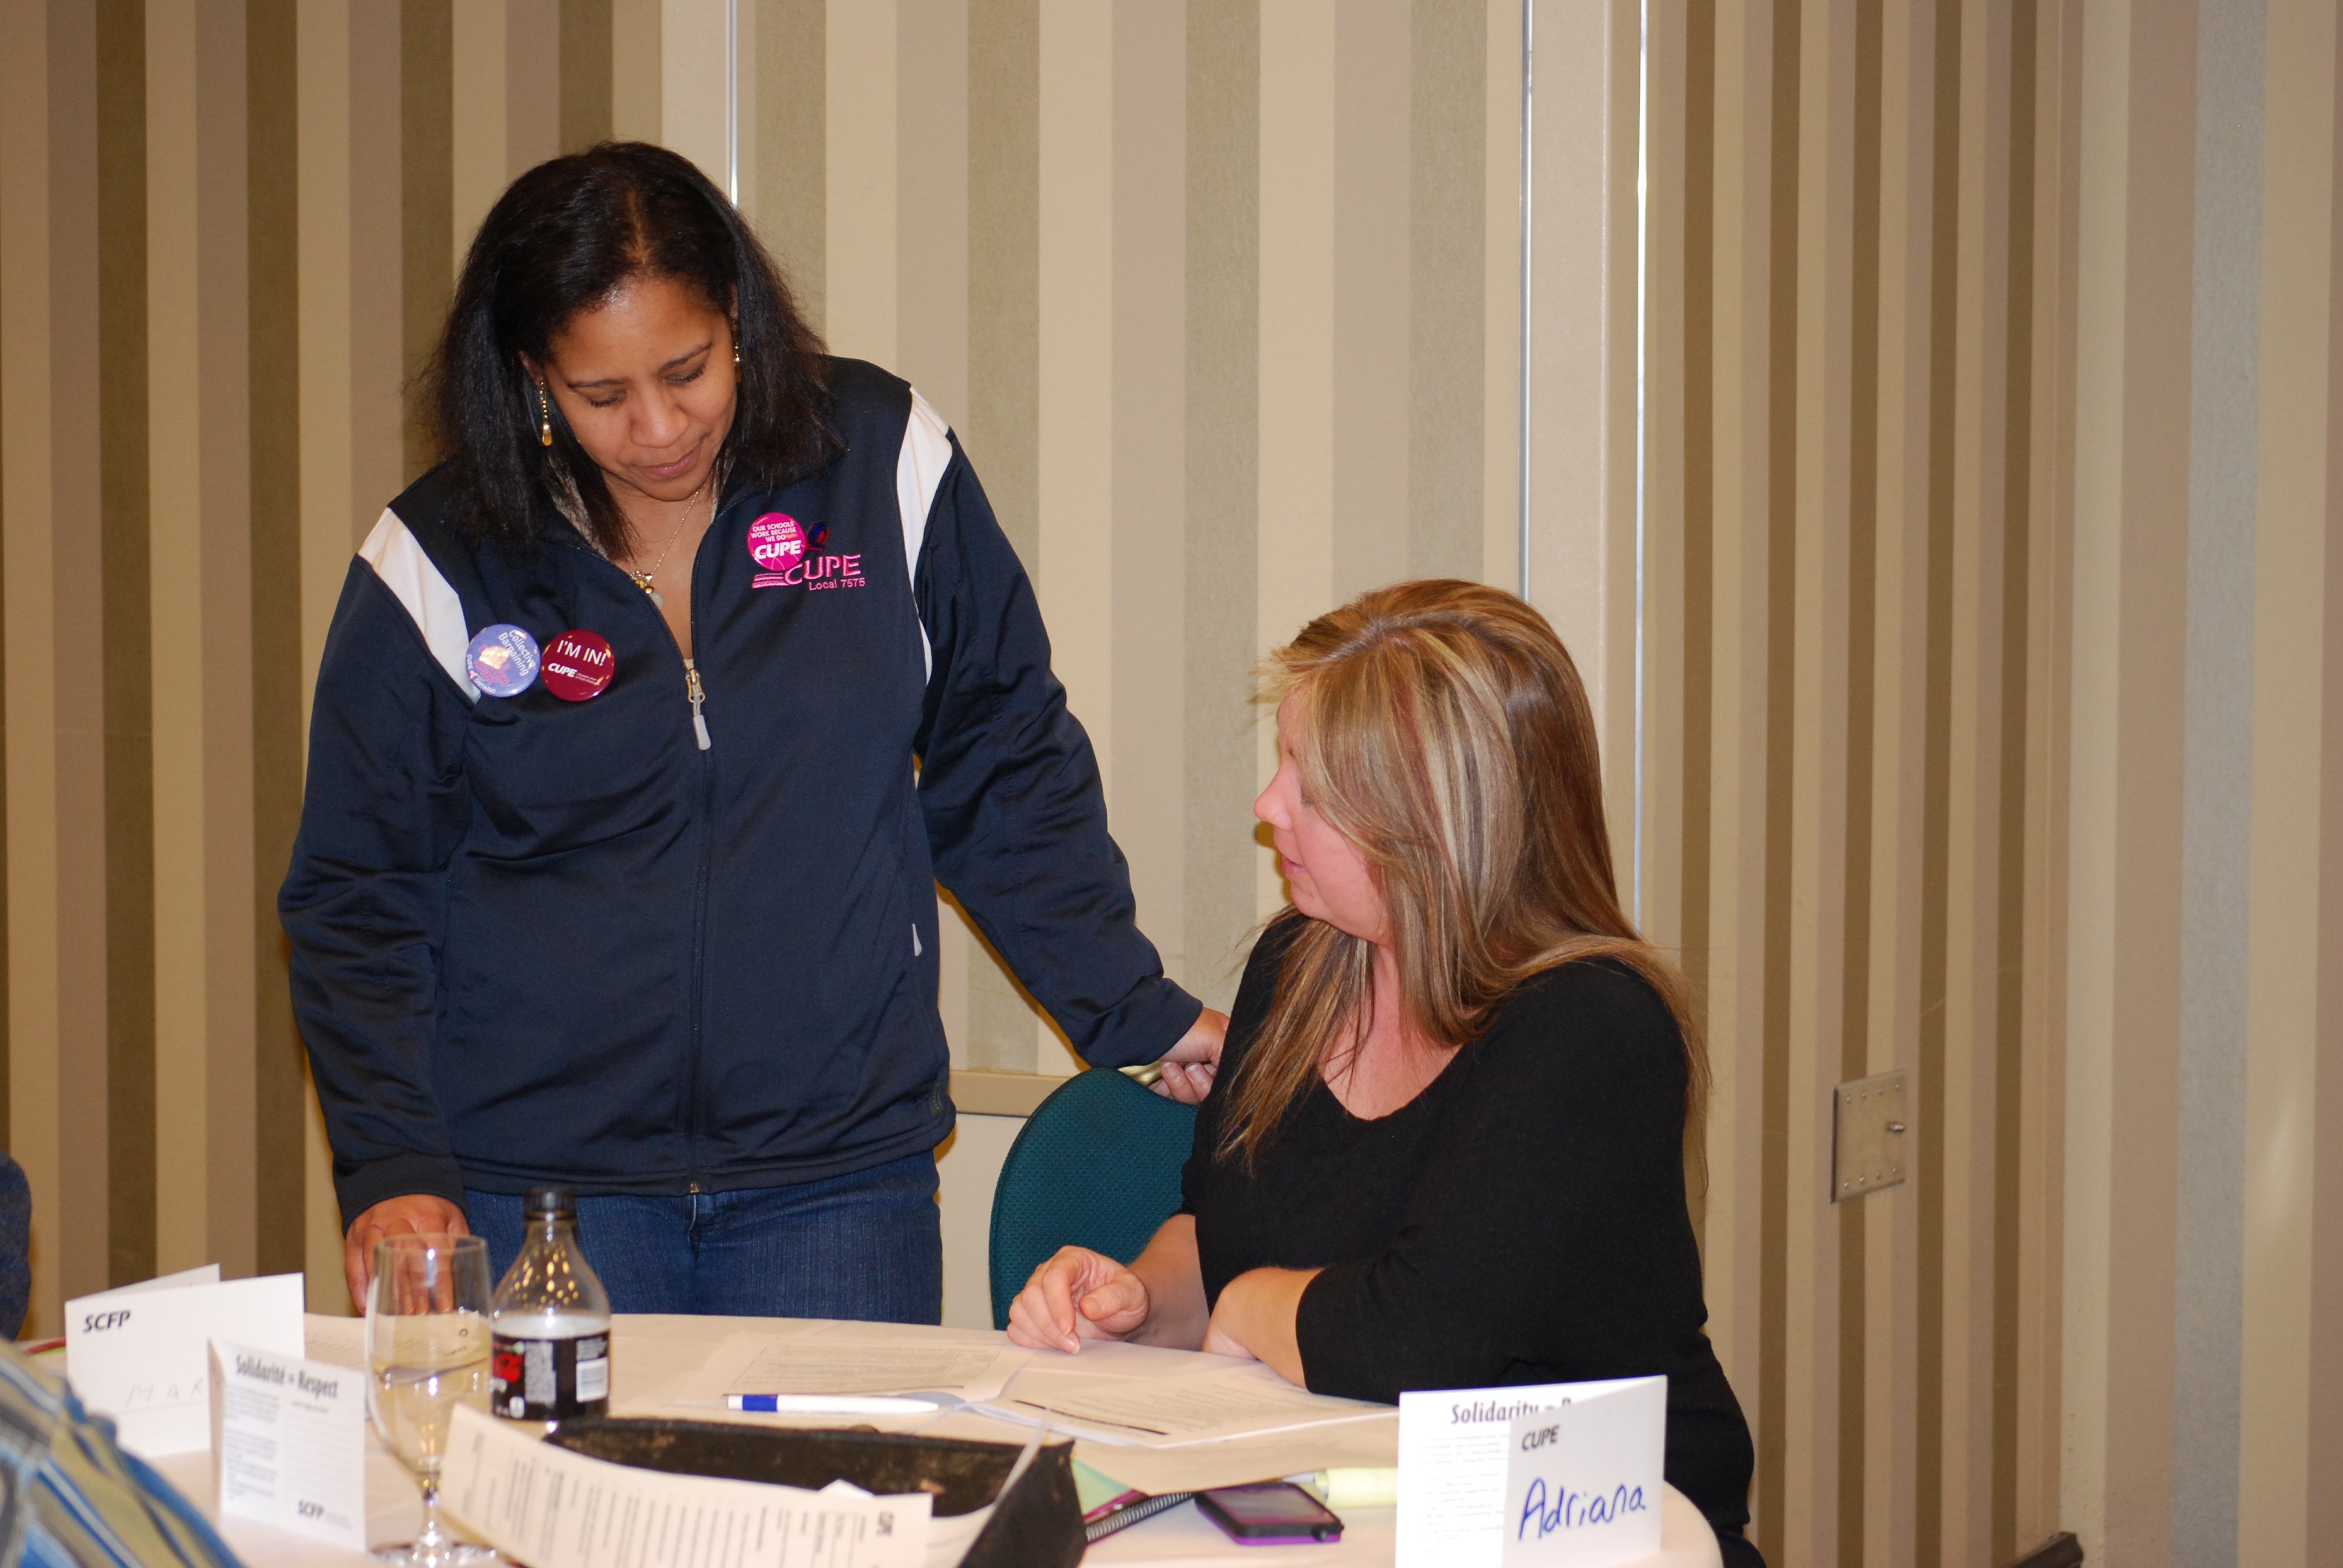 A CUPE instructor teaching a CUPE school attendee